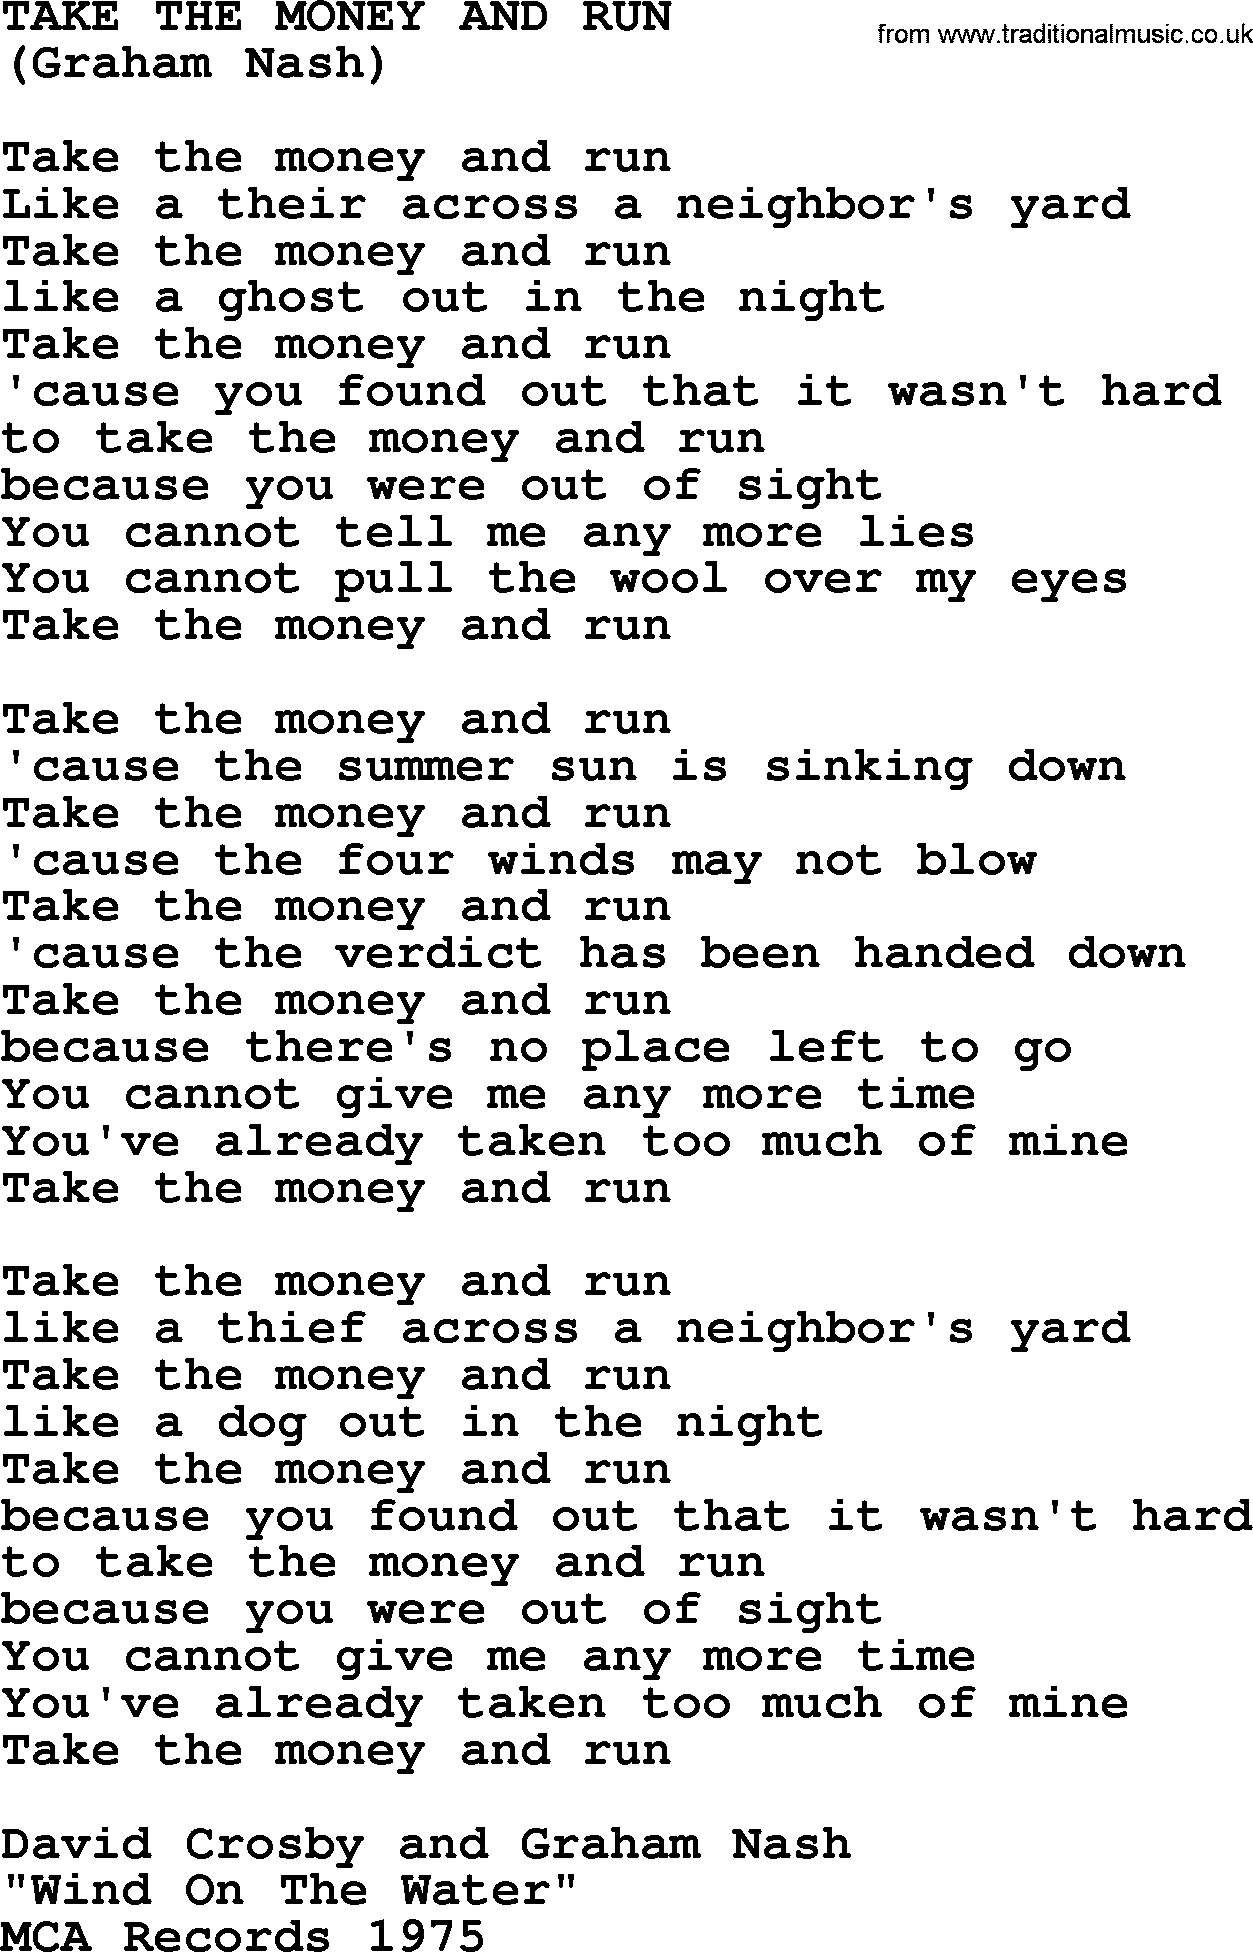 The Byrds song Take The Money And Run, lyrics